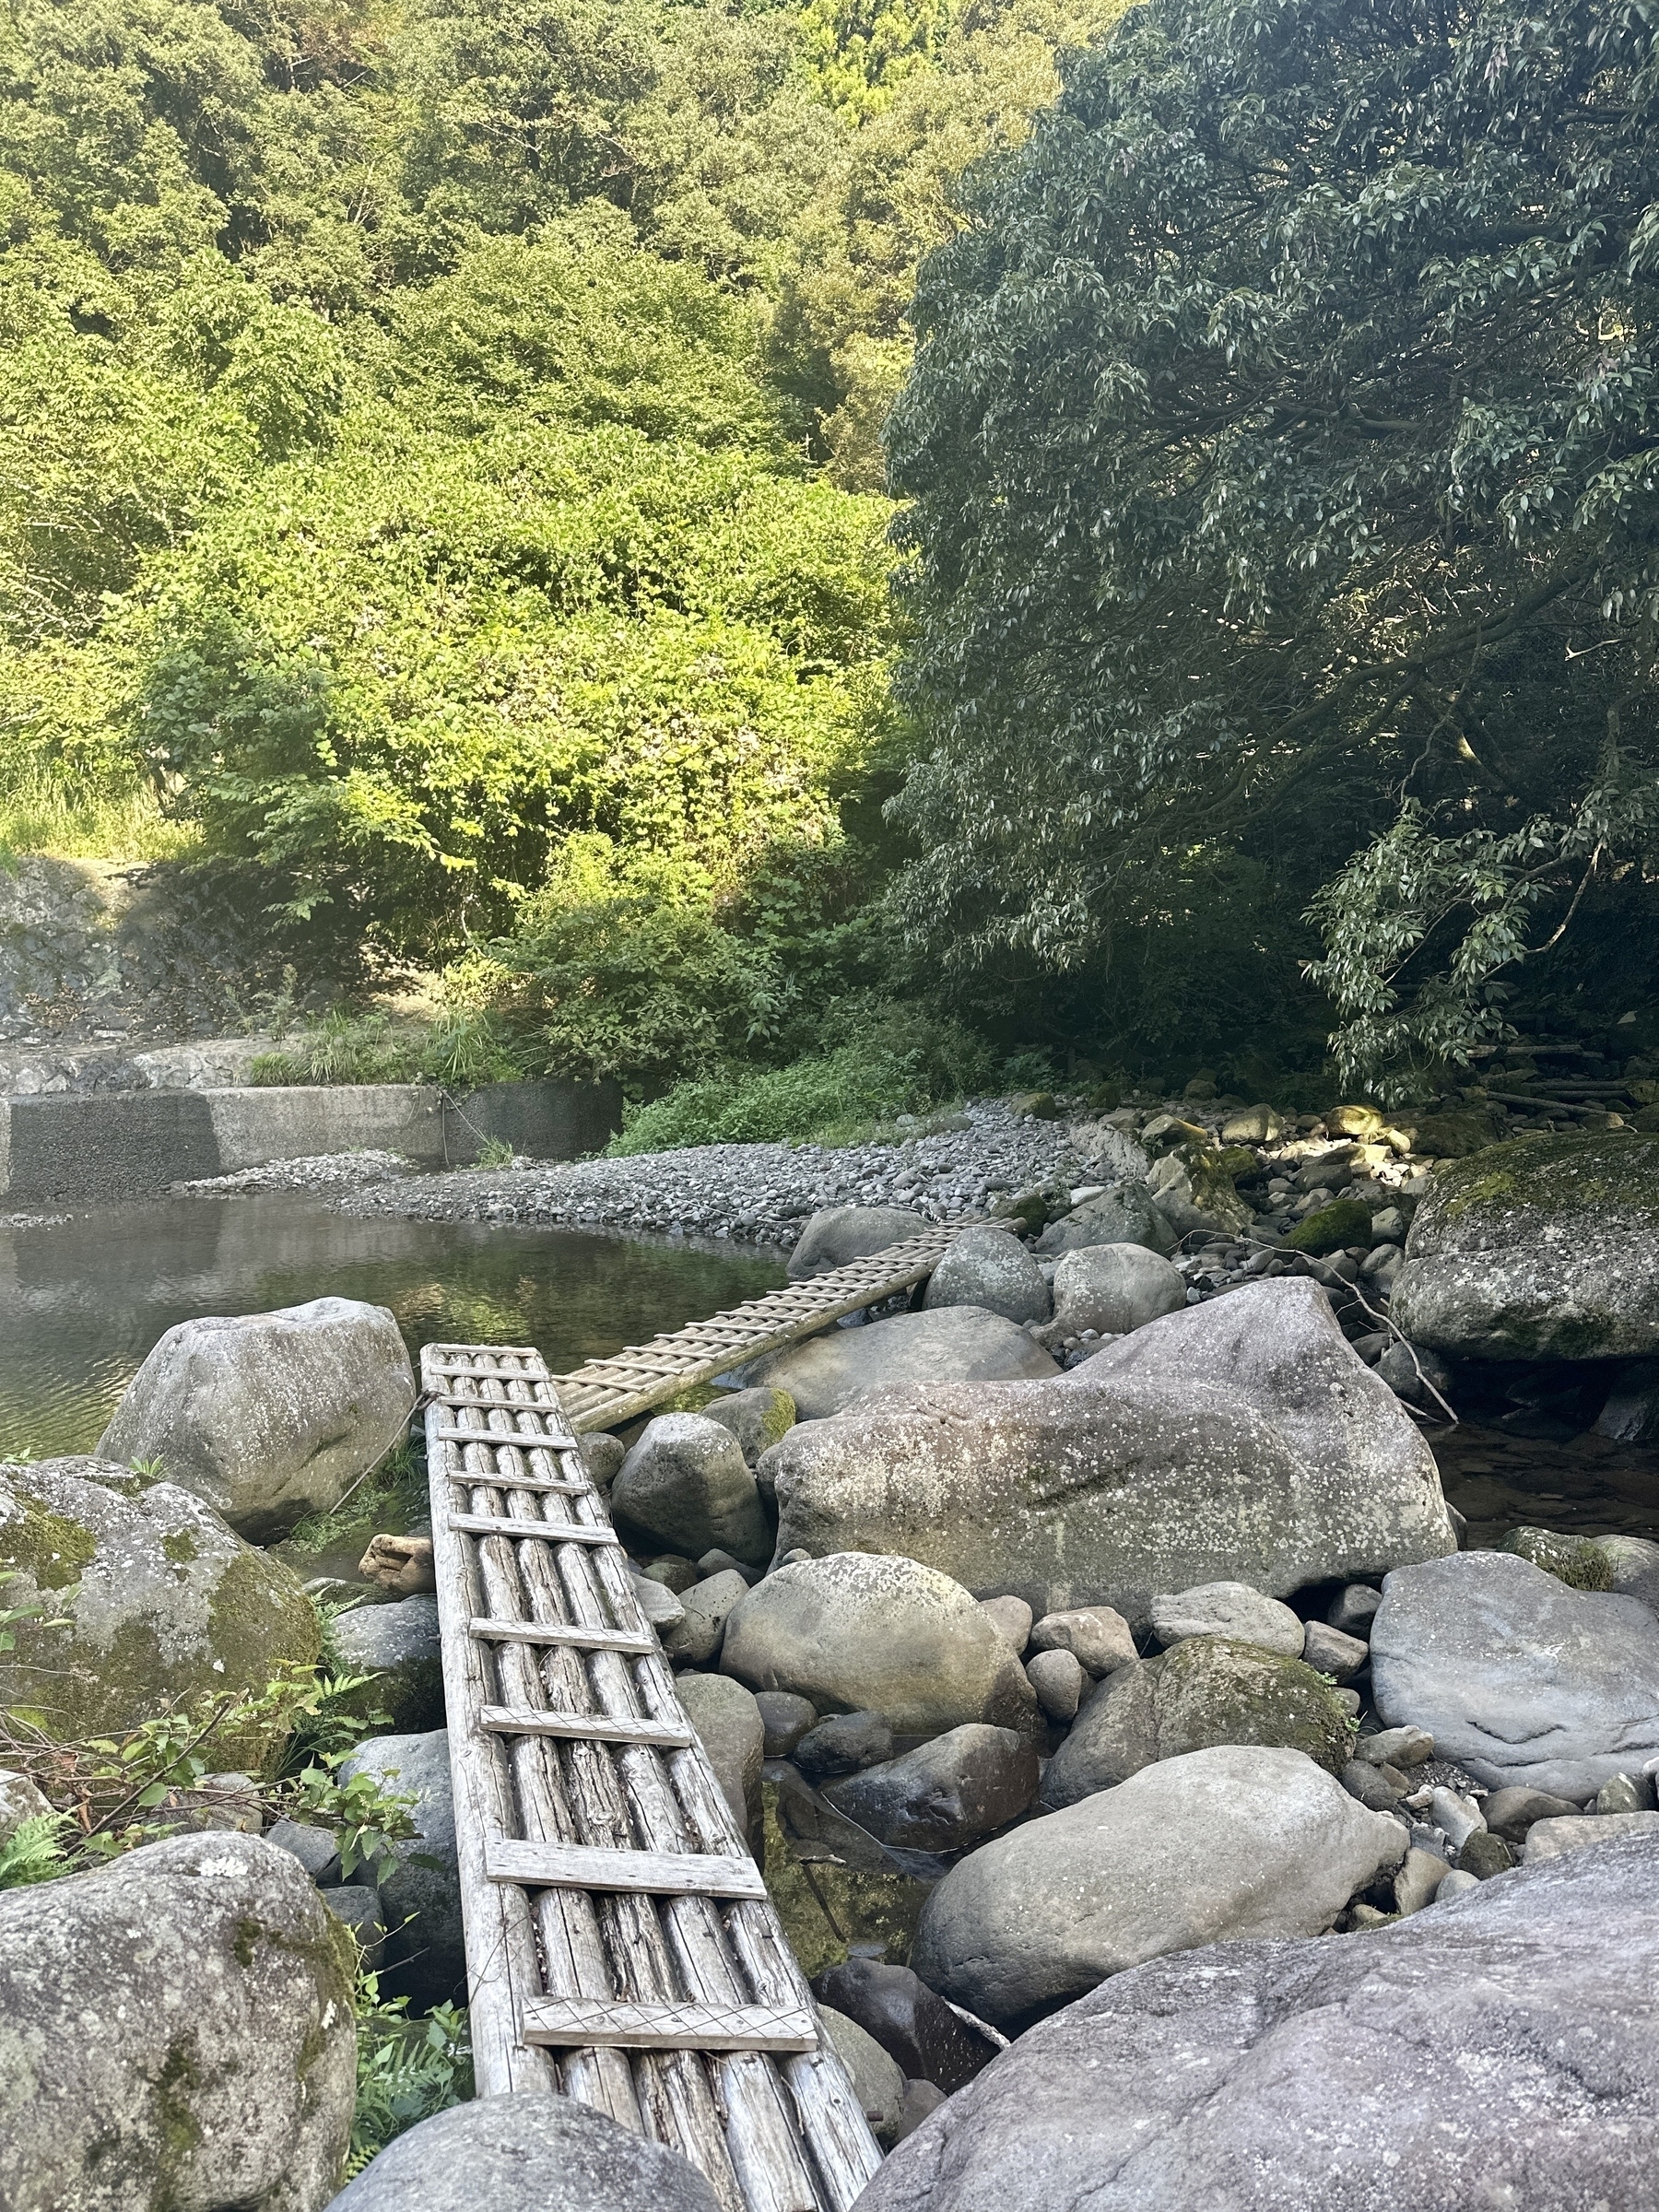 Photo of a wooden bridge placed across a river